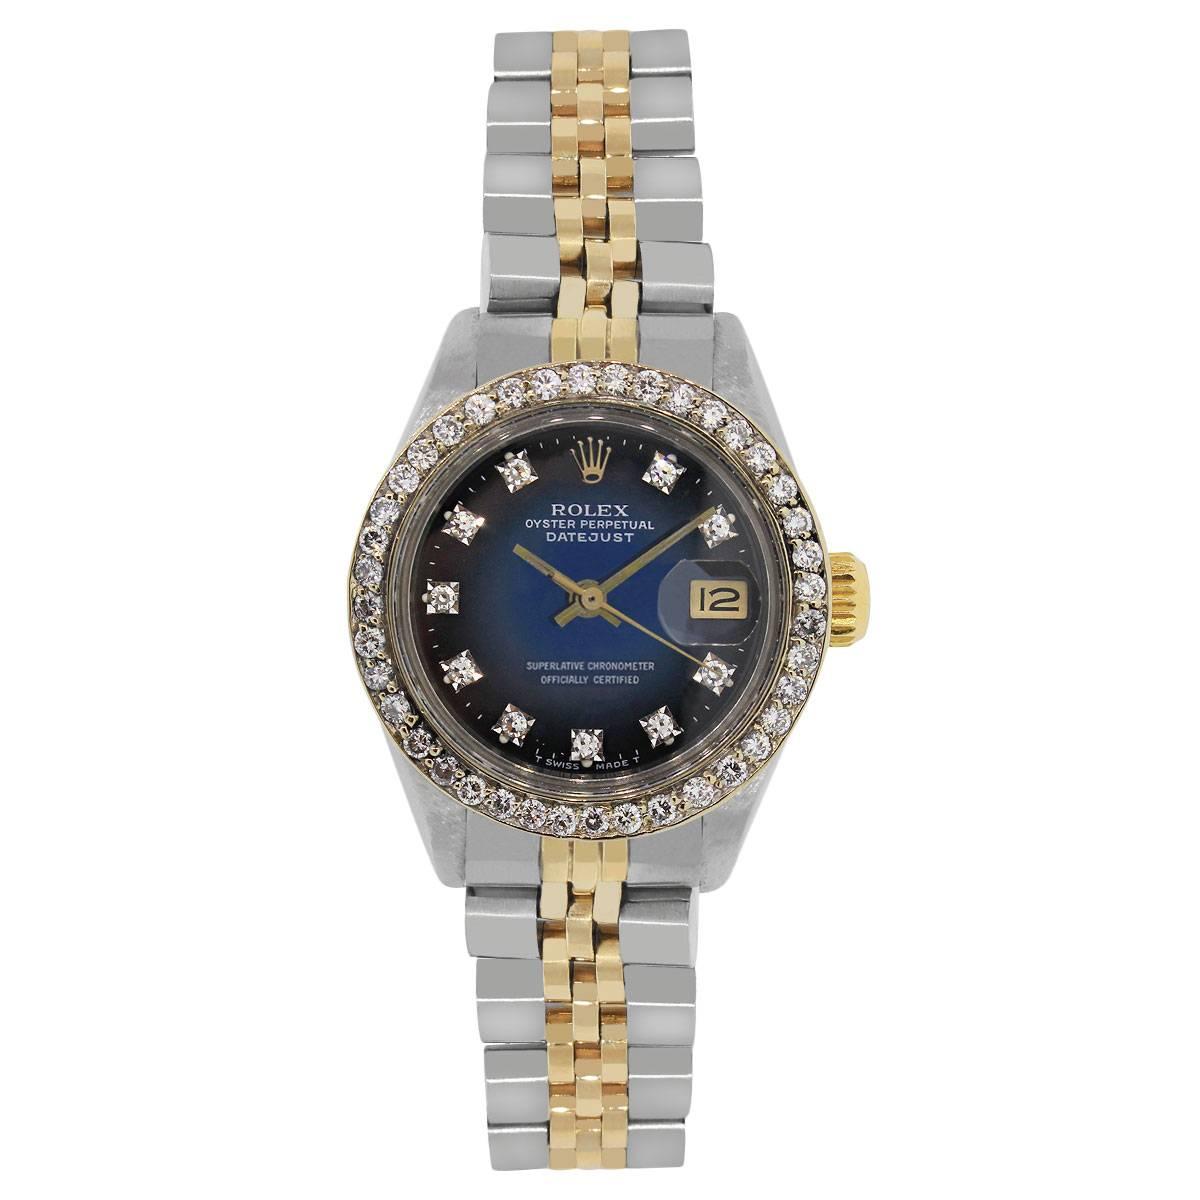 Brand: Rolex
MPN: 6917
Model: Datejust
Case Material: Stainless steel
Case Diameter: 26mm
Crystal: Acrylic
Bezel: Stainless Steel diamond bezel
Dial: Blue gradient dial with diamond hour markers (aftermarket) Yellow gold hour and minute hands. Date